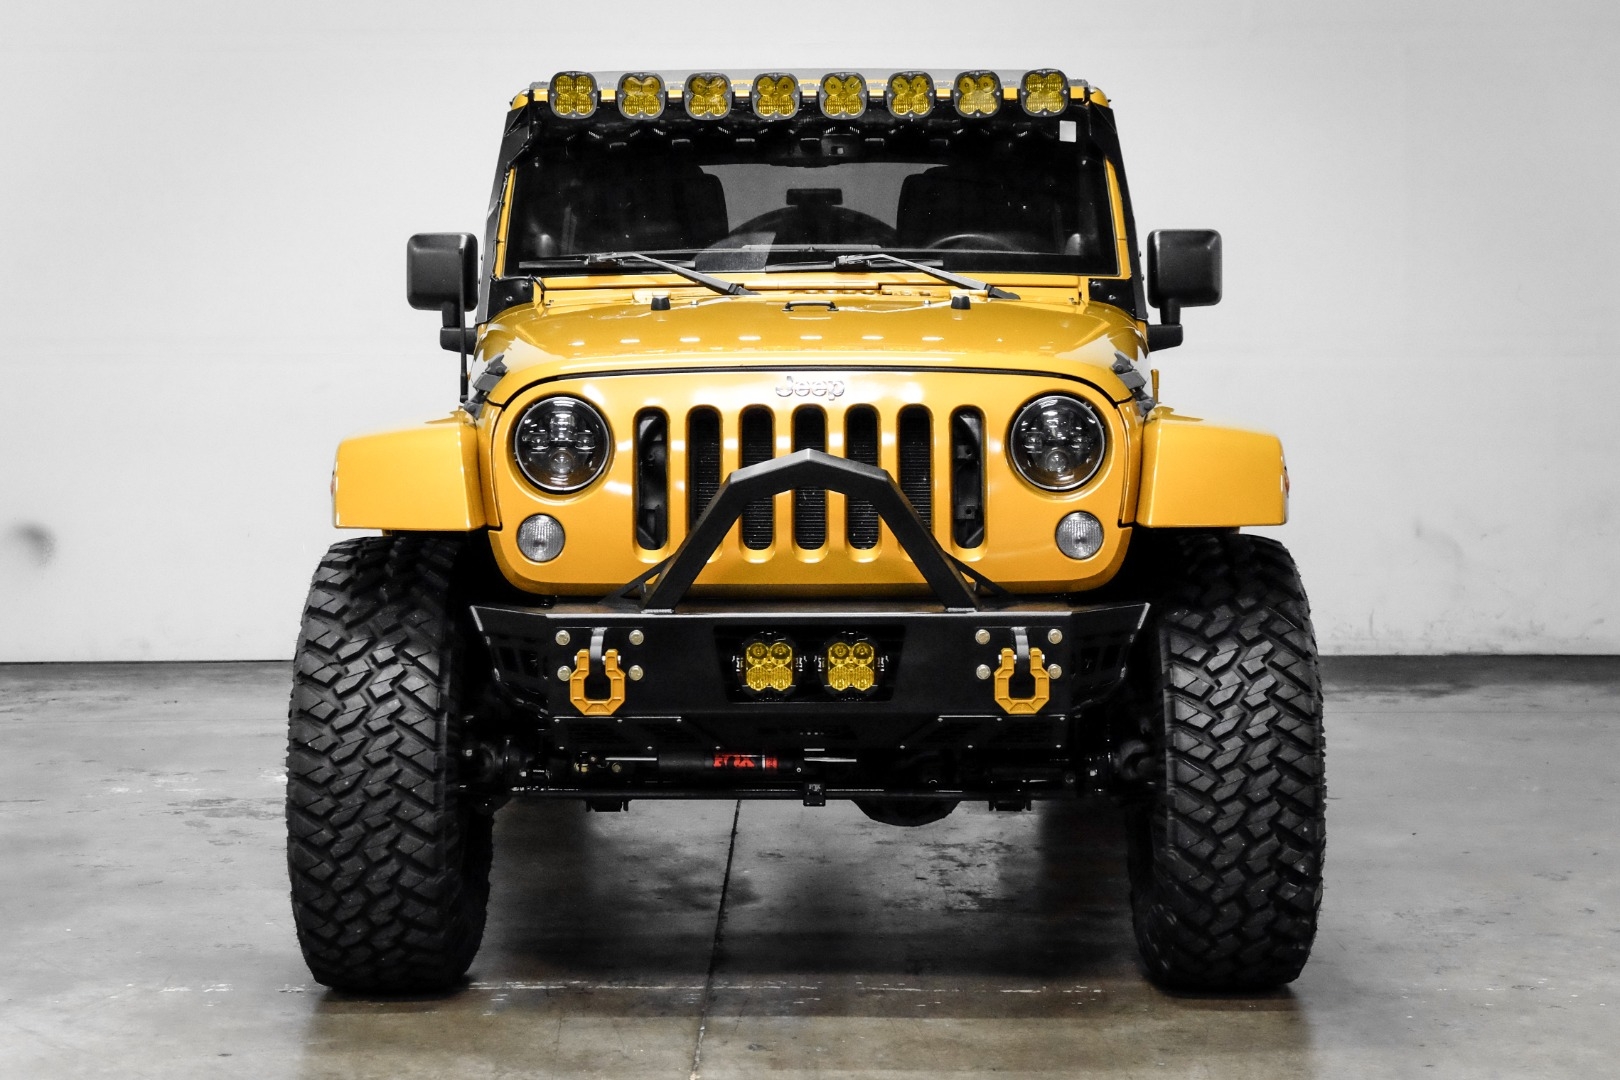 Slick Products Off-road Wash 32oz. Super Concentrated Jeep Wrangler 4x4  Offroad for sale online